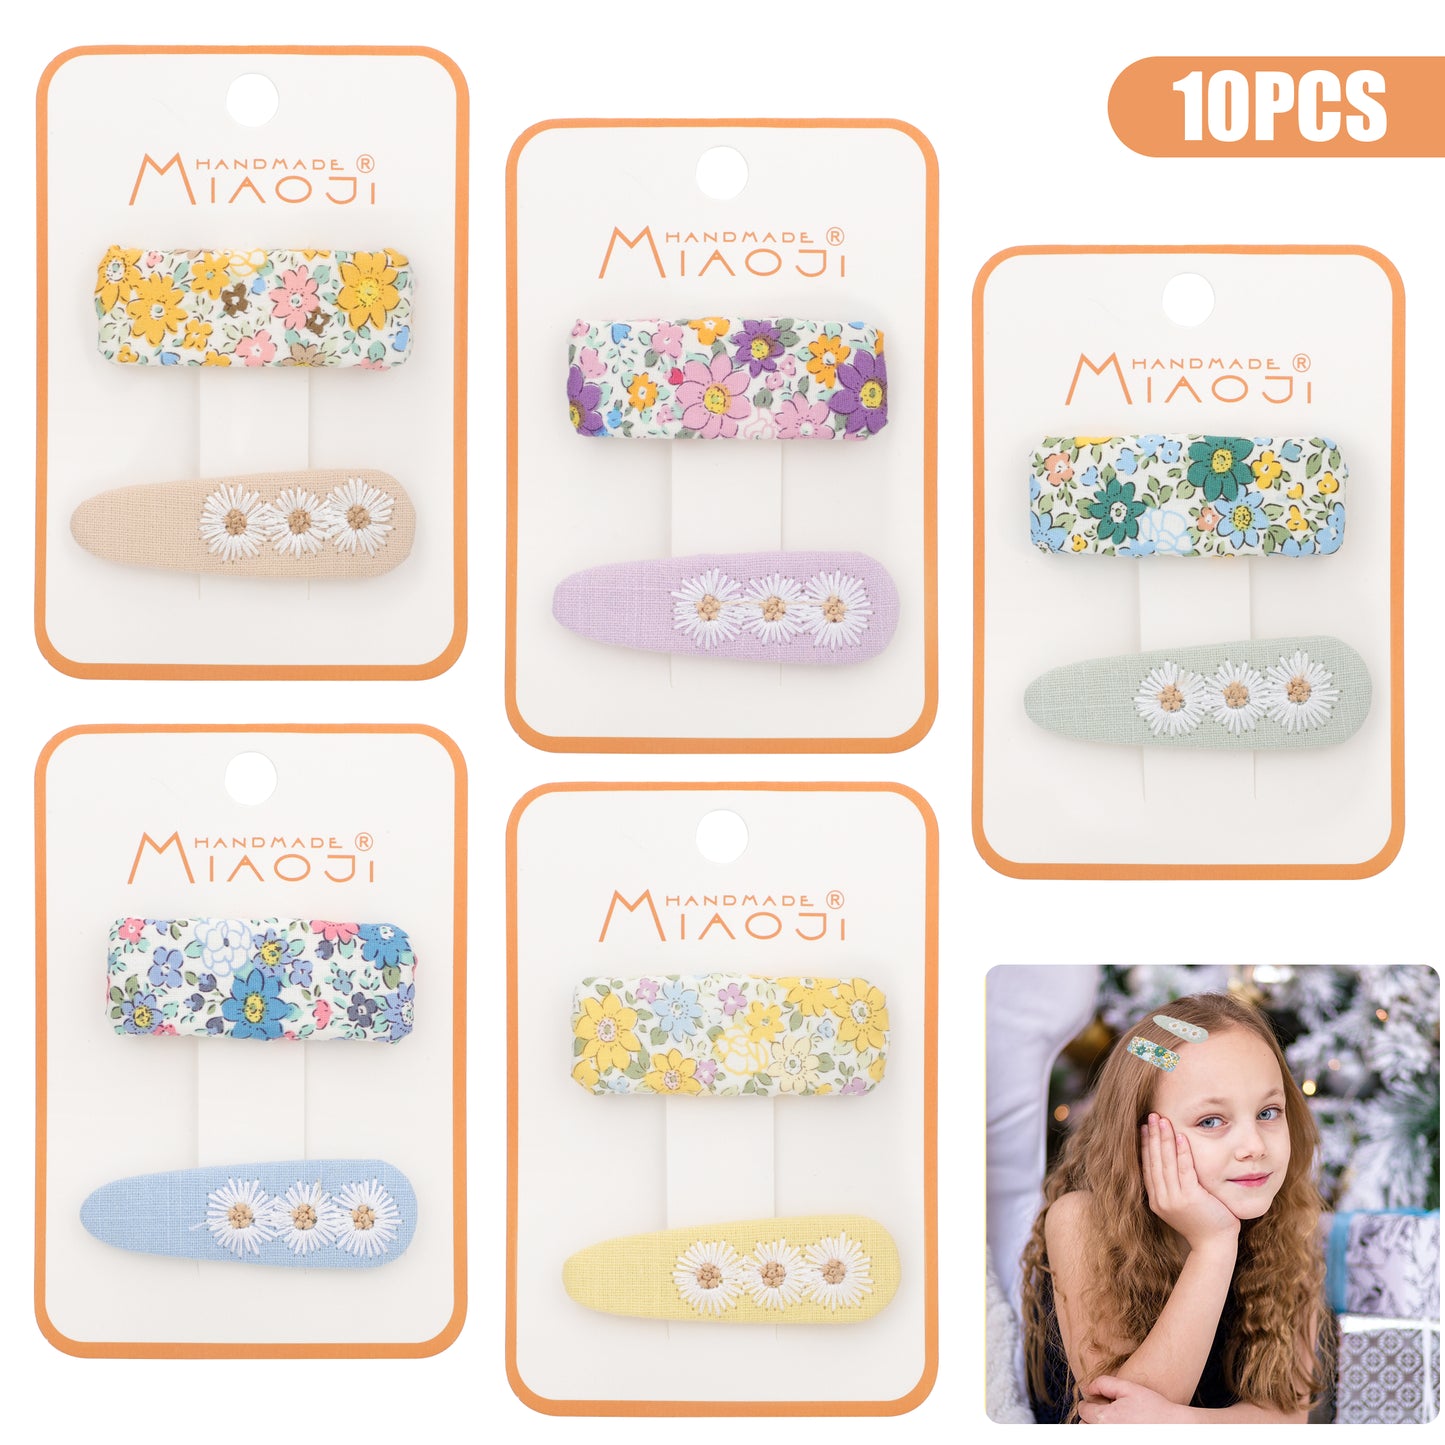 10pcs Cute Floral Hair Clips - Different Color Flower Pattern Hair Accessories for Babies Toddlers Kids Girls